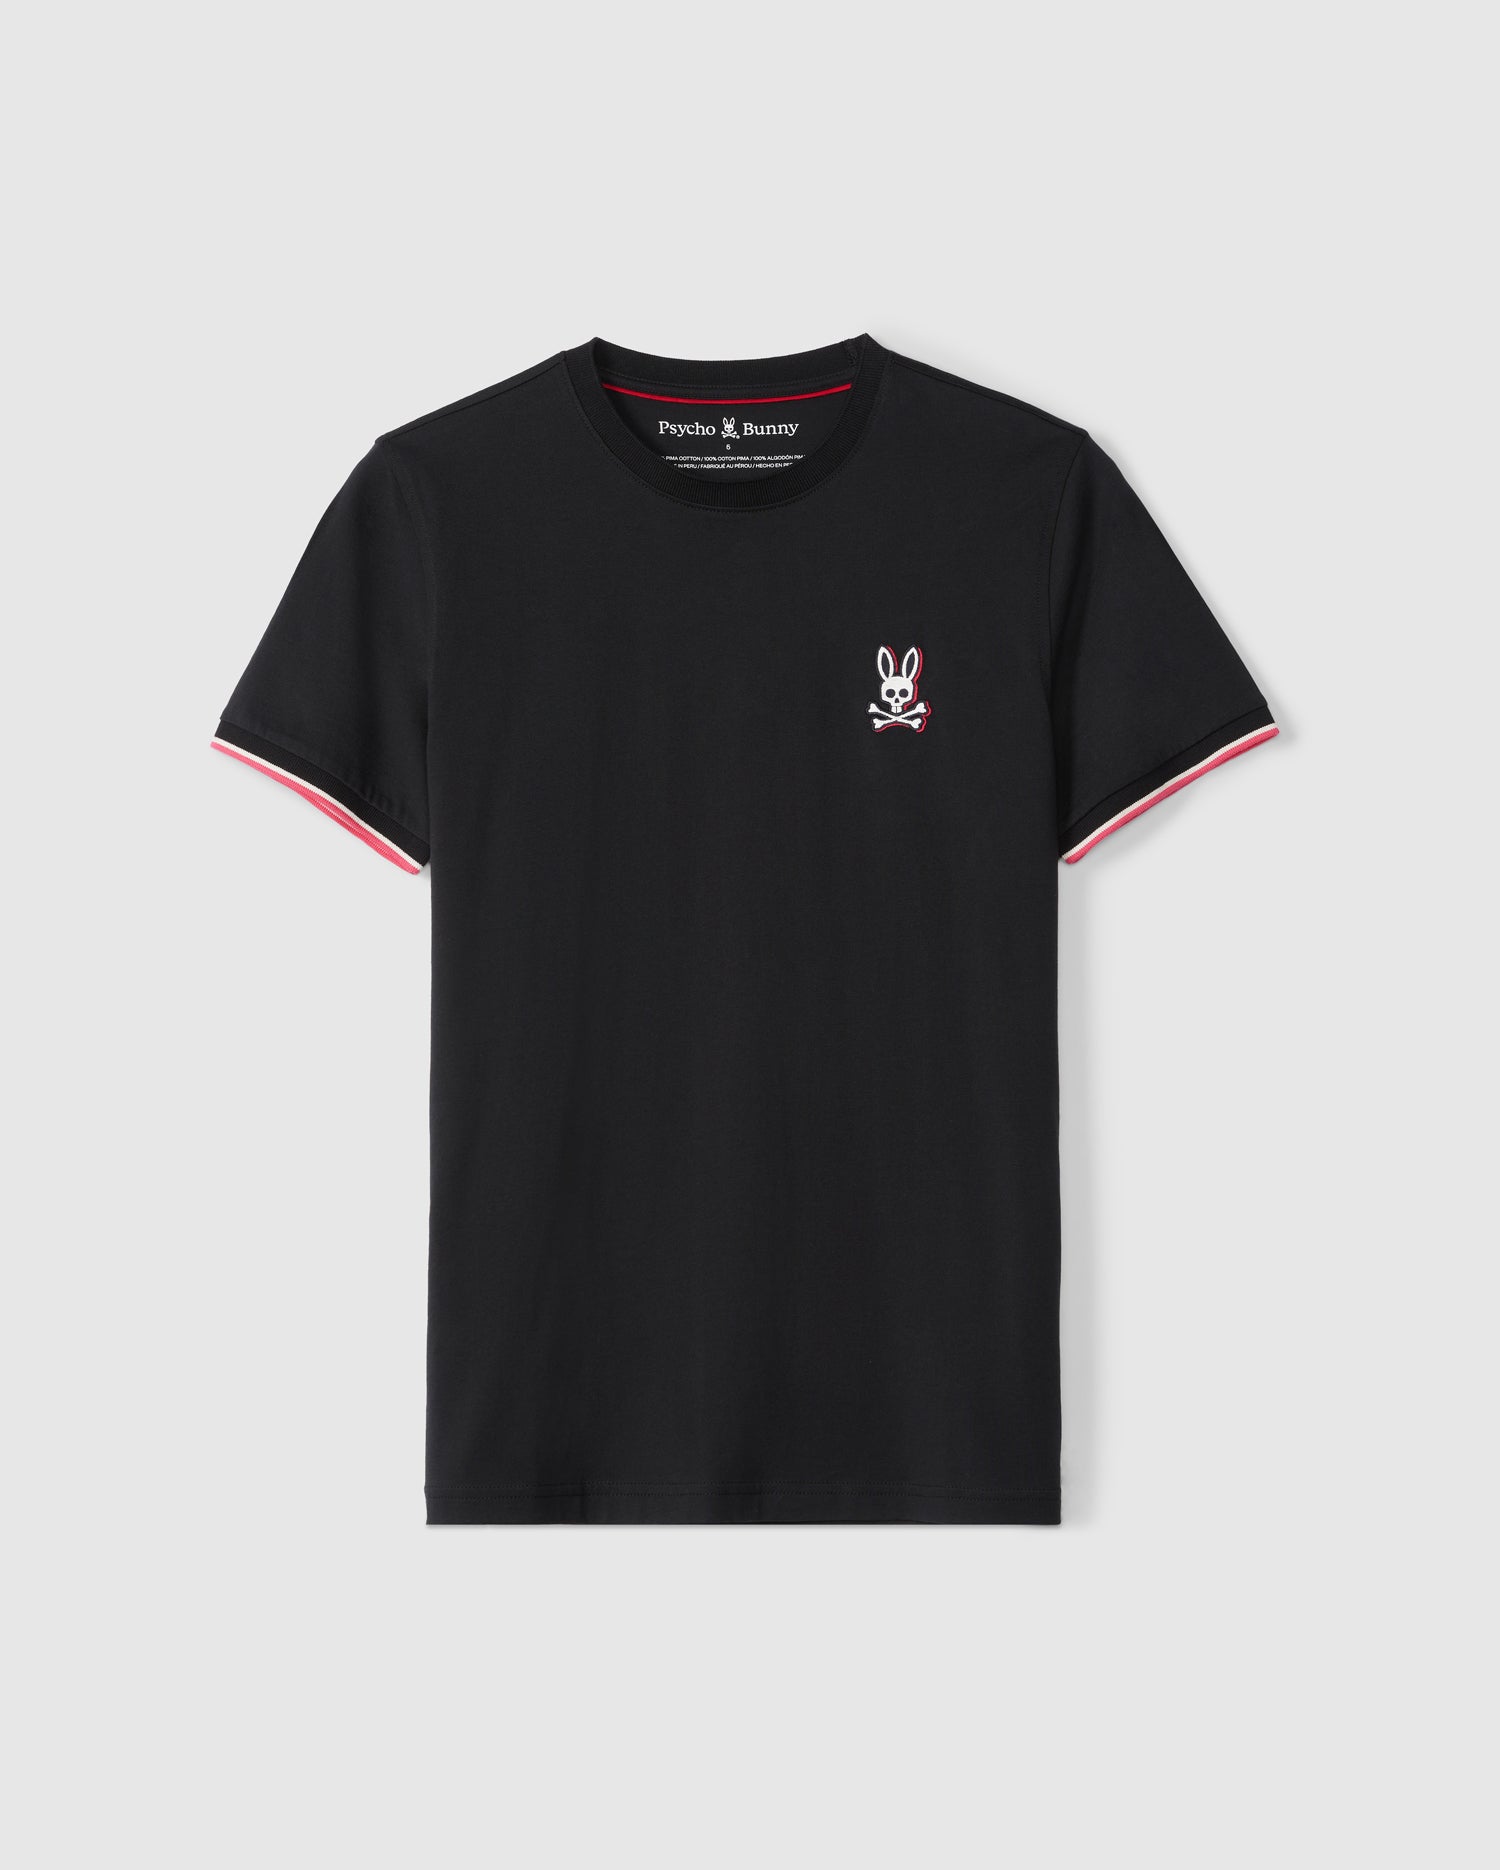 Black short-sleeved fashion tee made from Pima cotton, featuring an embroidered white bunny skull and crossbones logo on the left chest. The sleeves and neckline have red and white trim detailing. The tag inside reads 